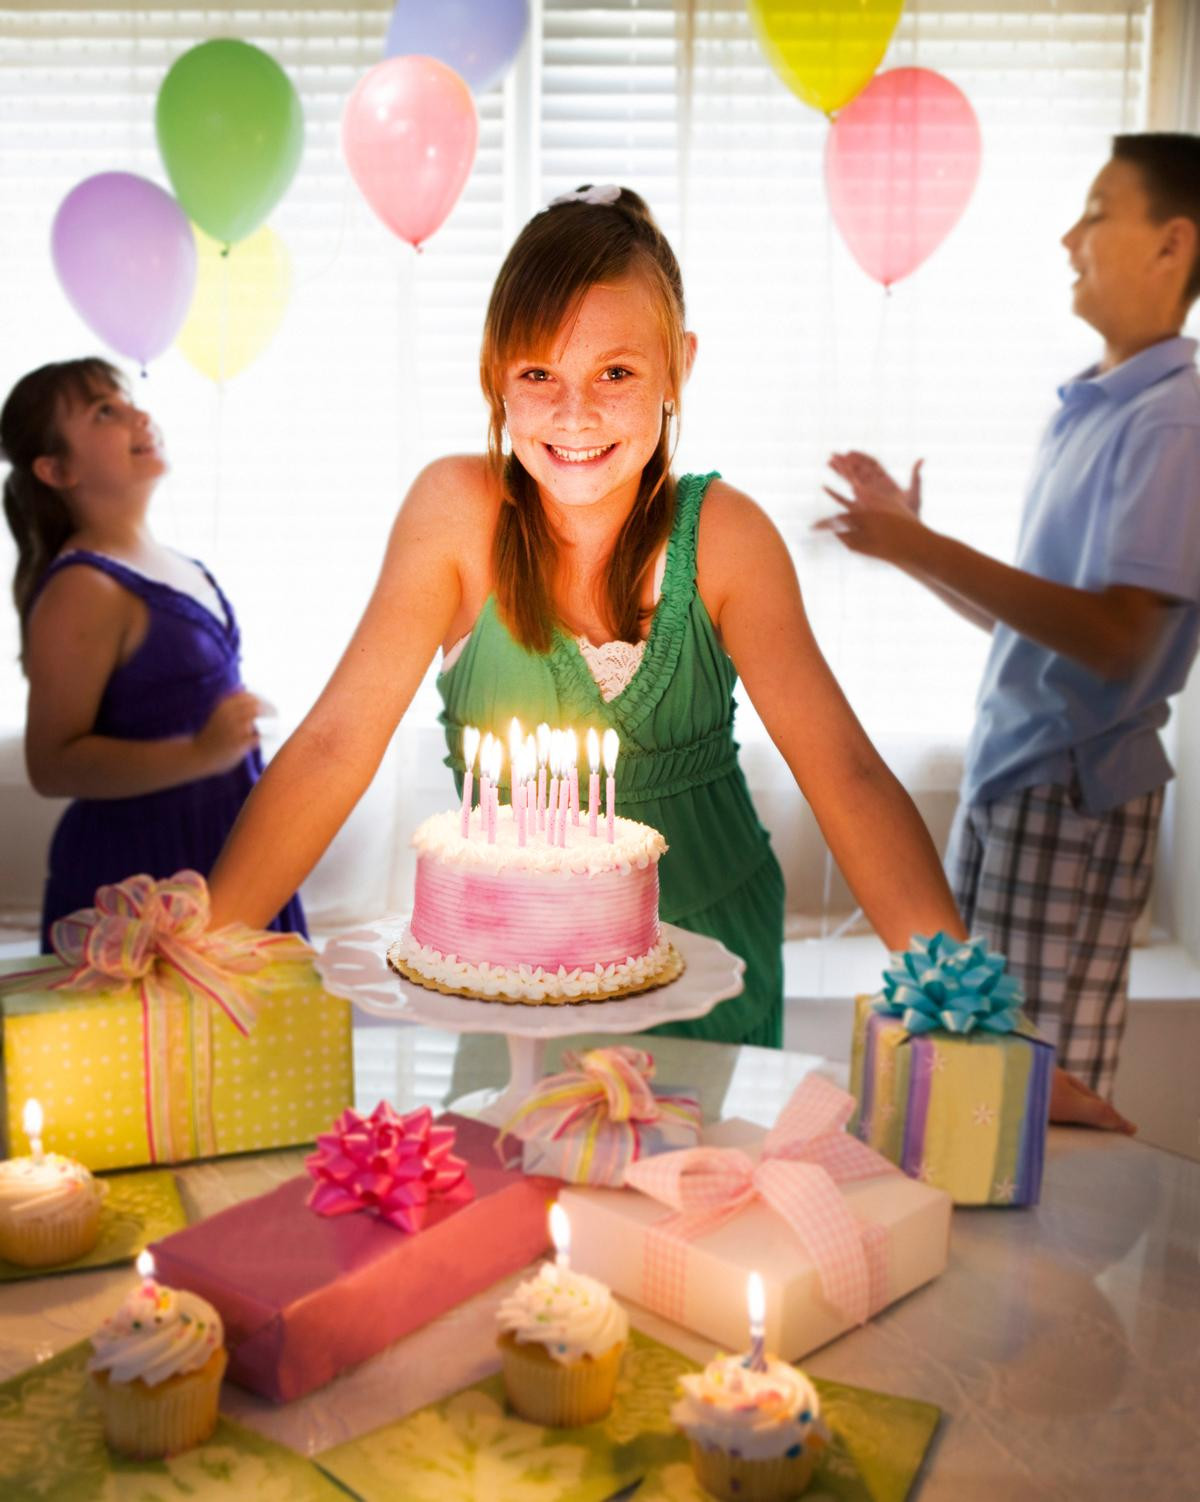 Girl Birthday Party Ideas
 Party Ideas for 13 year old Girls Birthday Frenzy